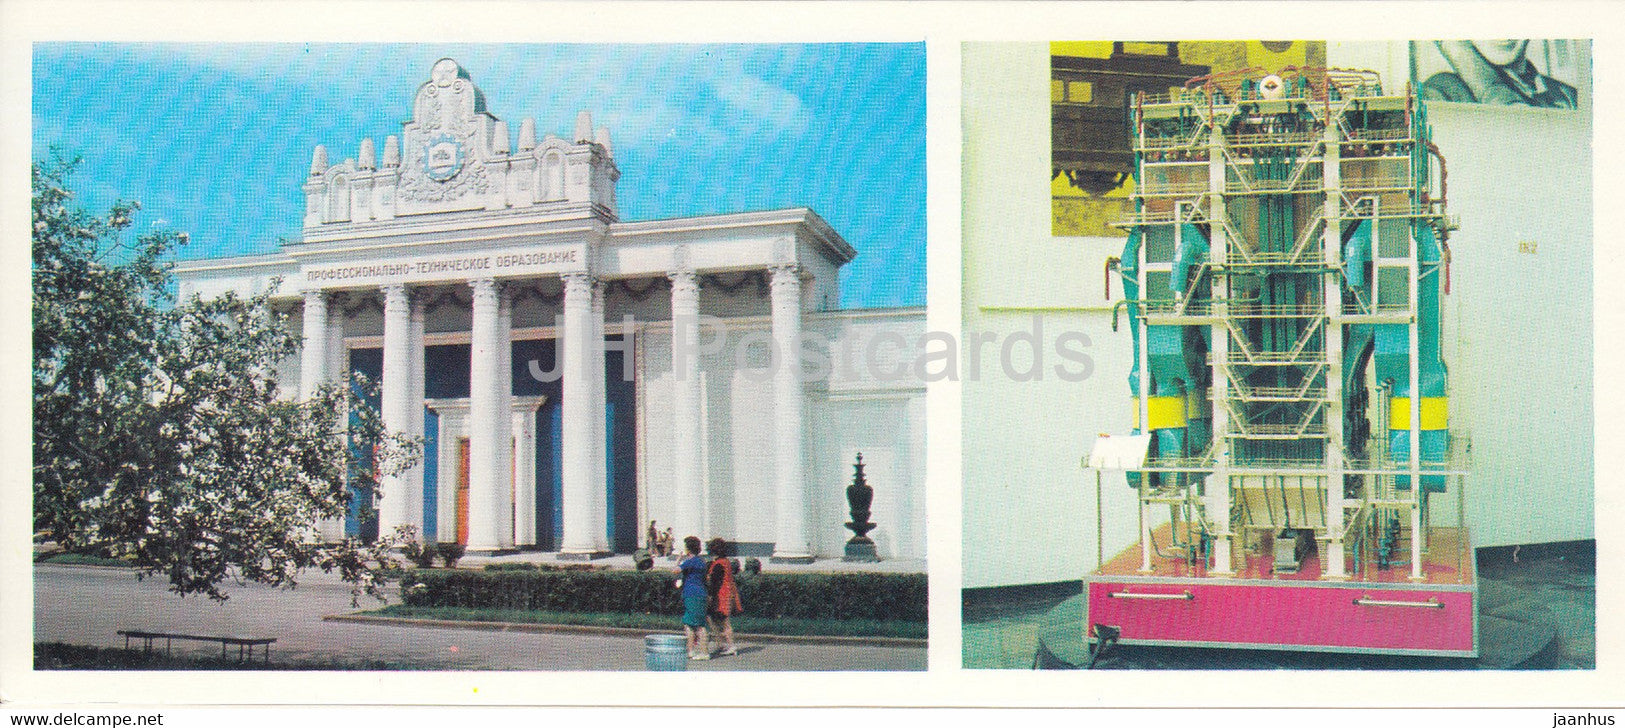 The Vocational Training Pavilion - The model of acting steam boiler - VDNKh - 1975 - Russia USSR - unused - JH Postcards